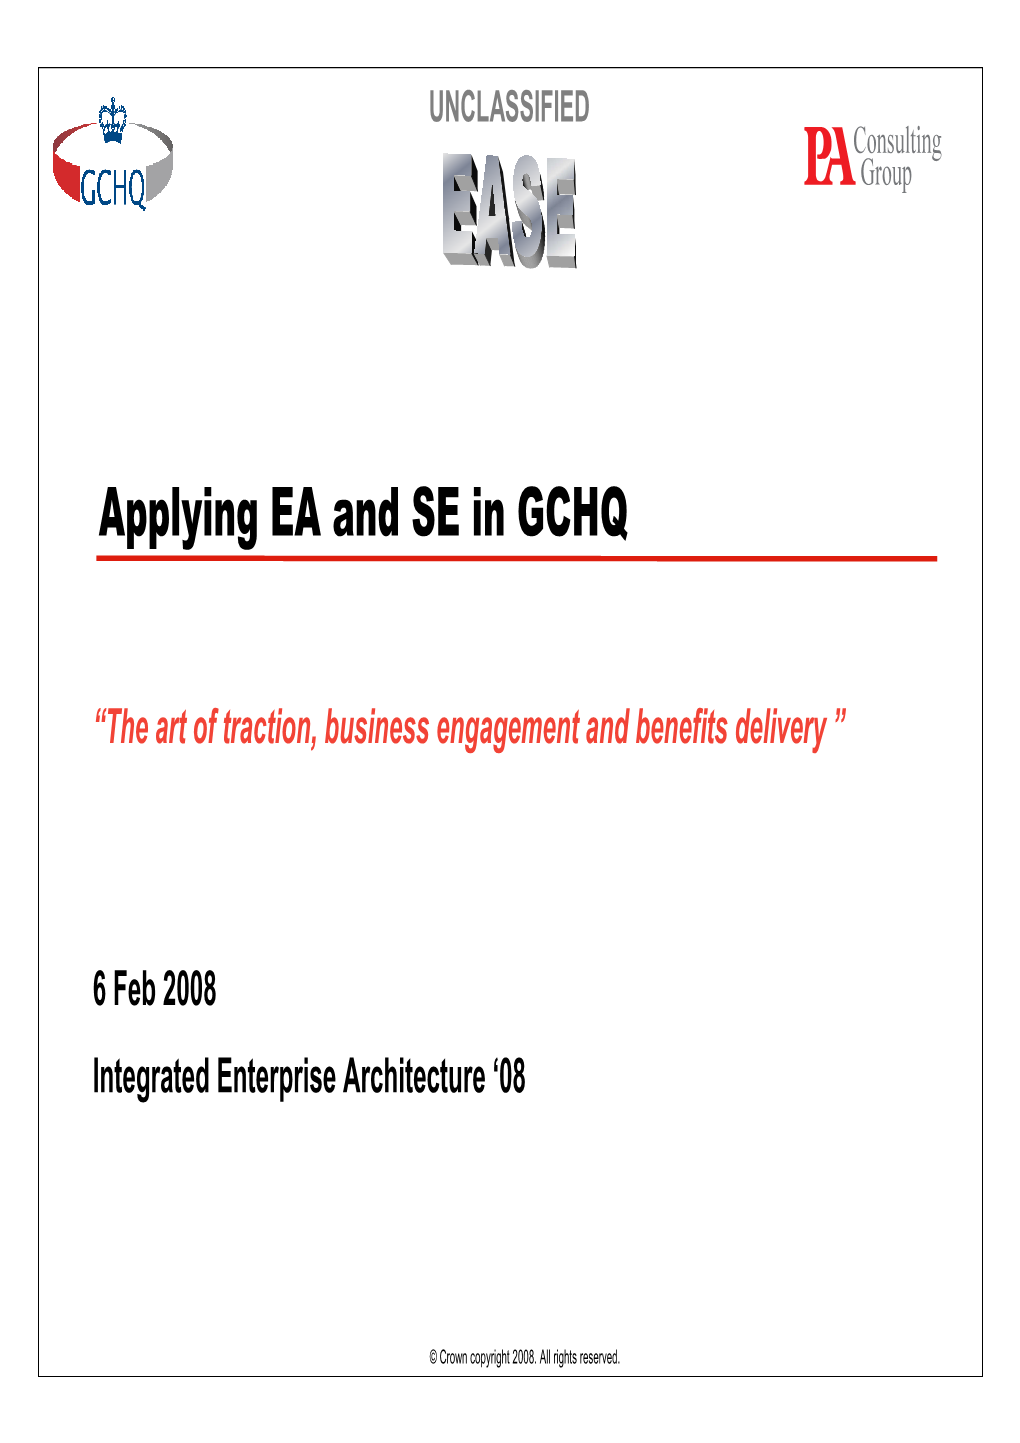 Applying EA and Systems Engineering in GCHQ